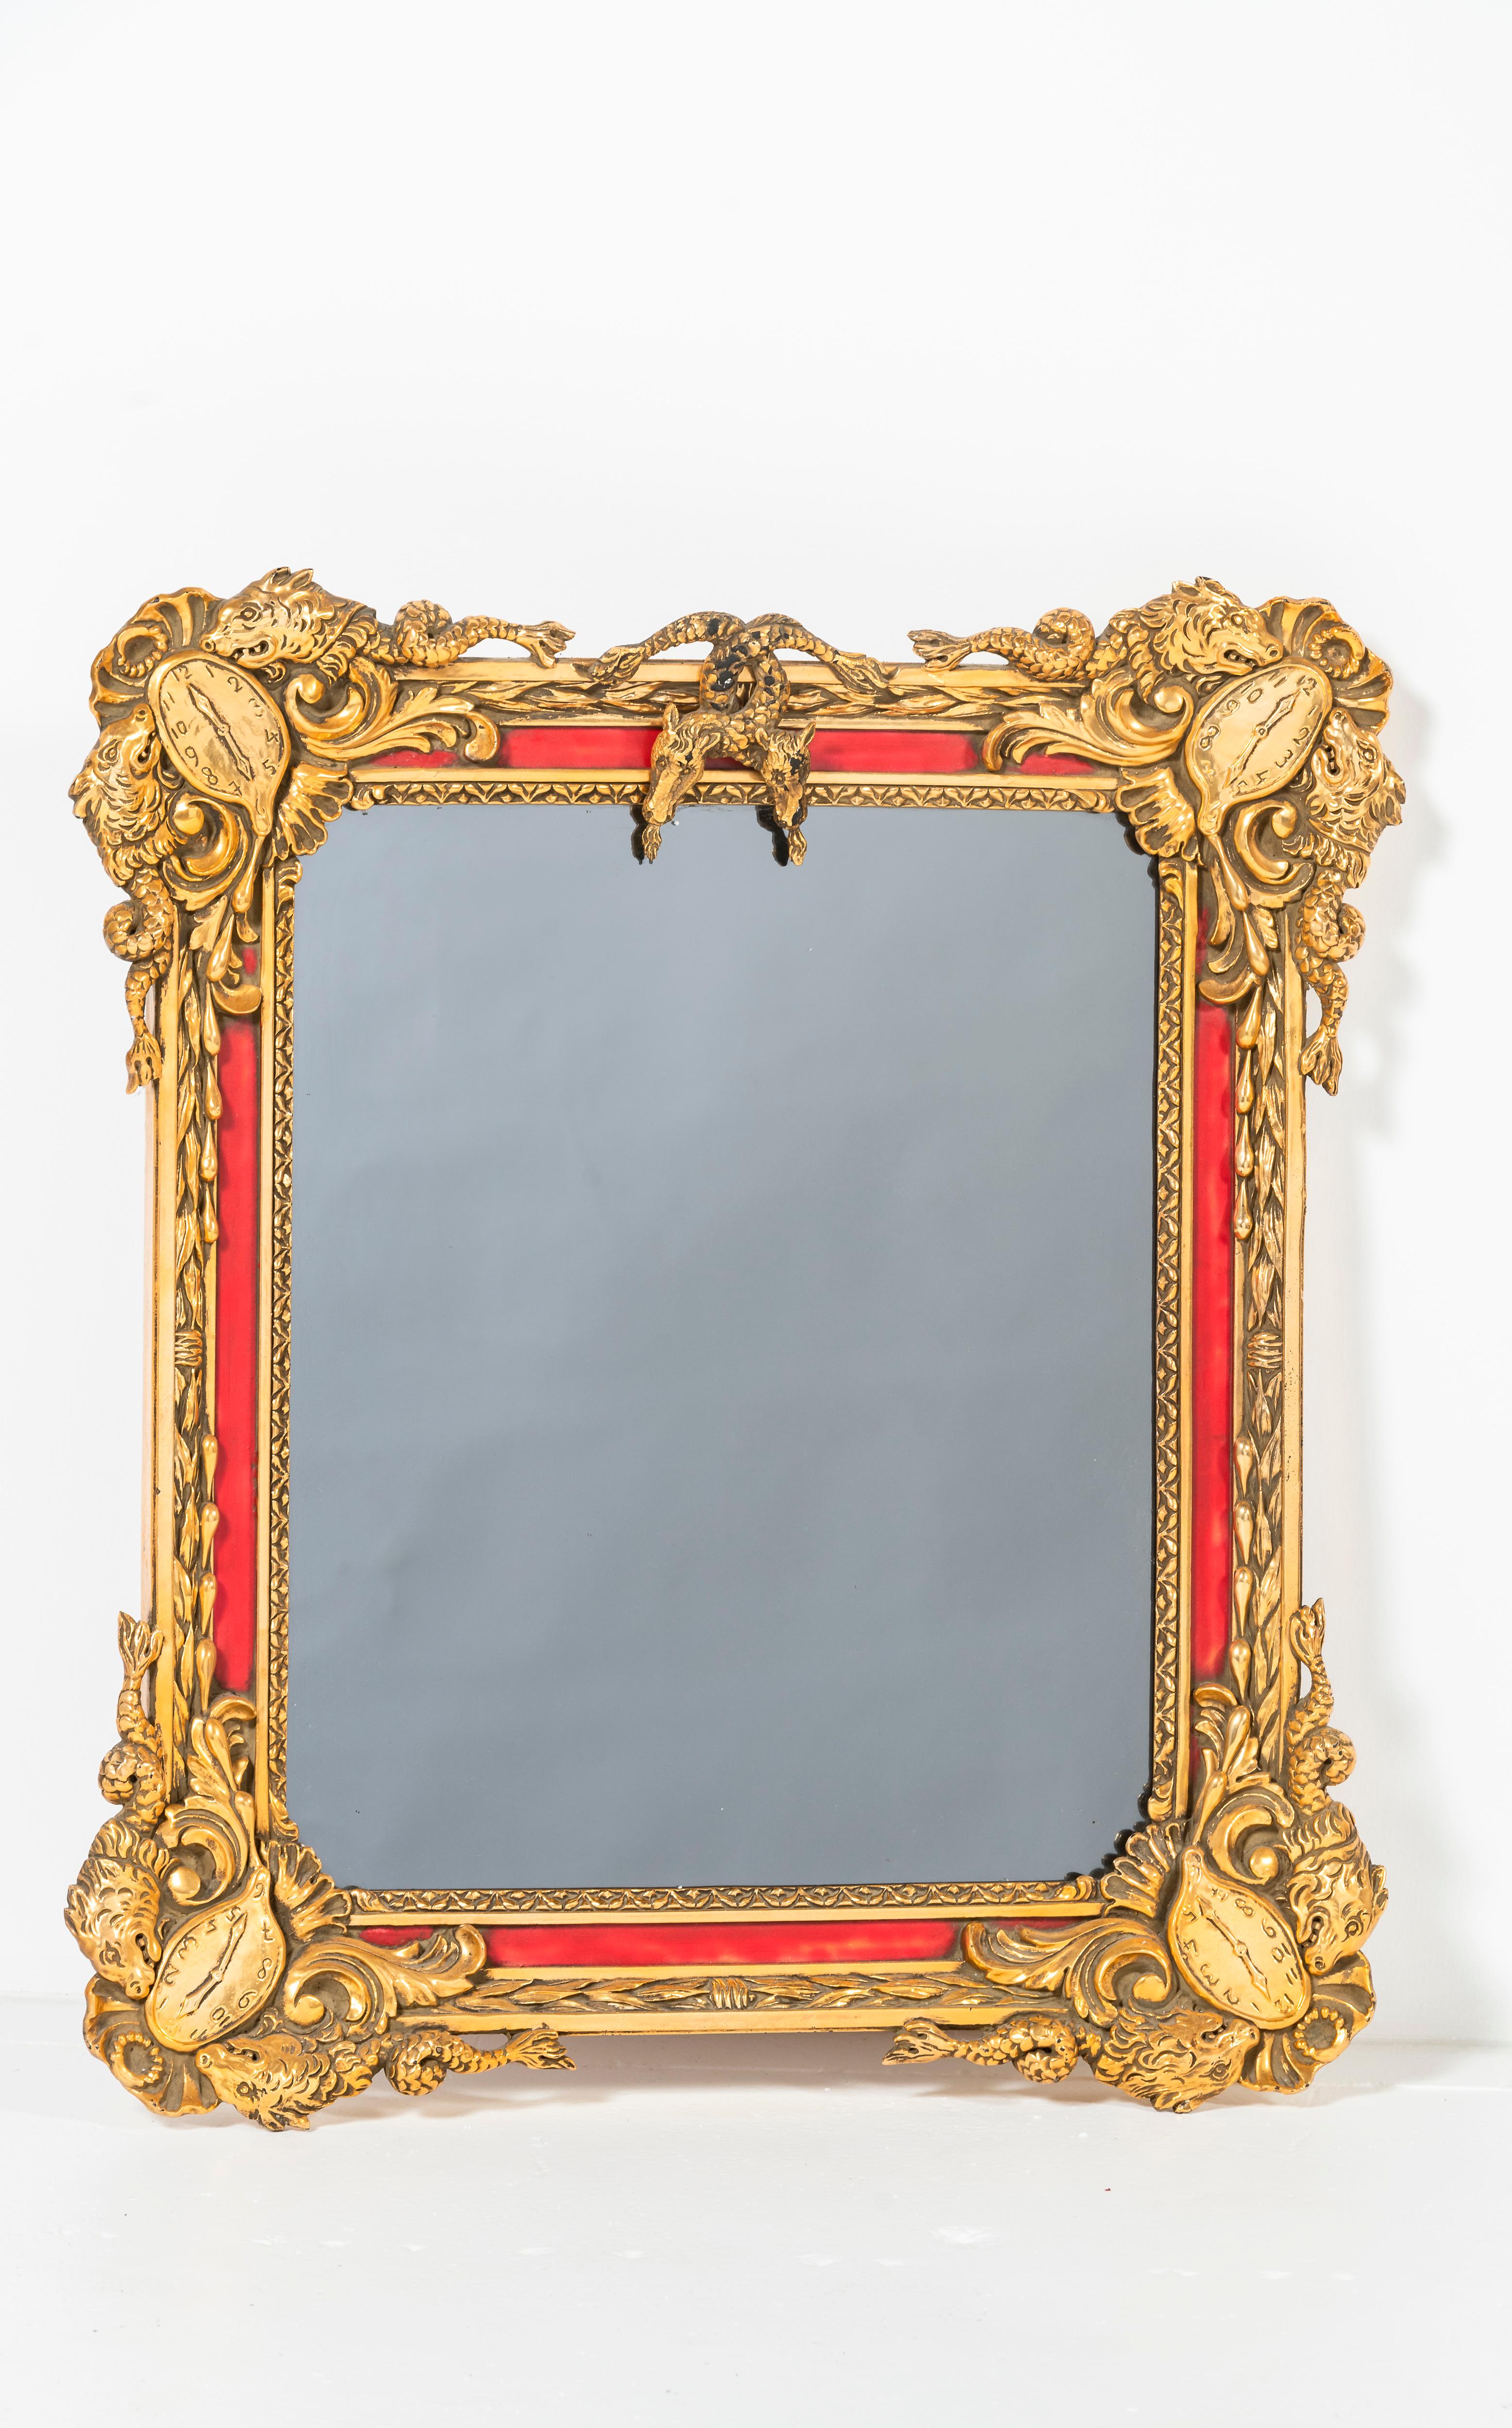 Surrealist mirror by Salvador Dalí (1904-1989). Mirror is framed in cast century wood, gesso, gold leaf, and paint. This captivating piece features imagery of his melting clocks from 